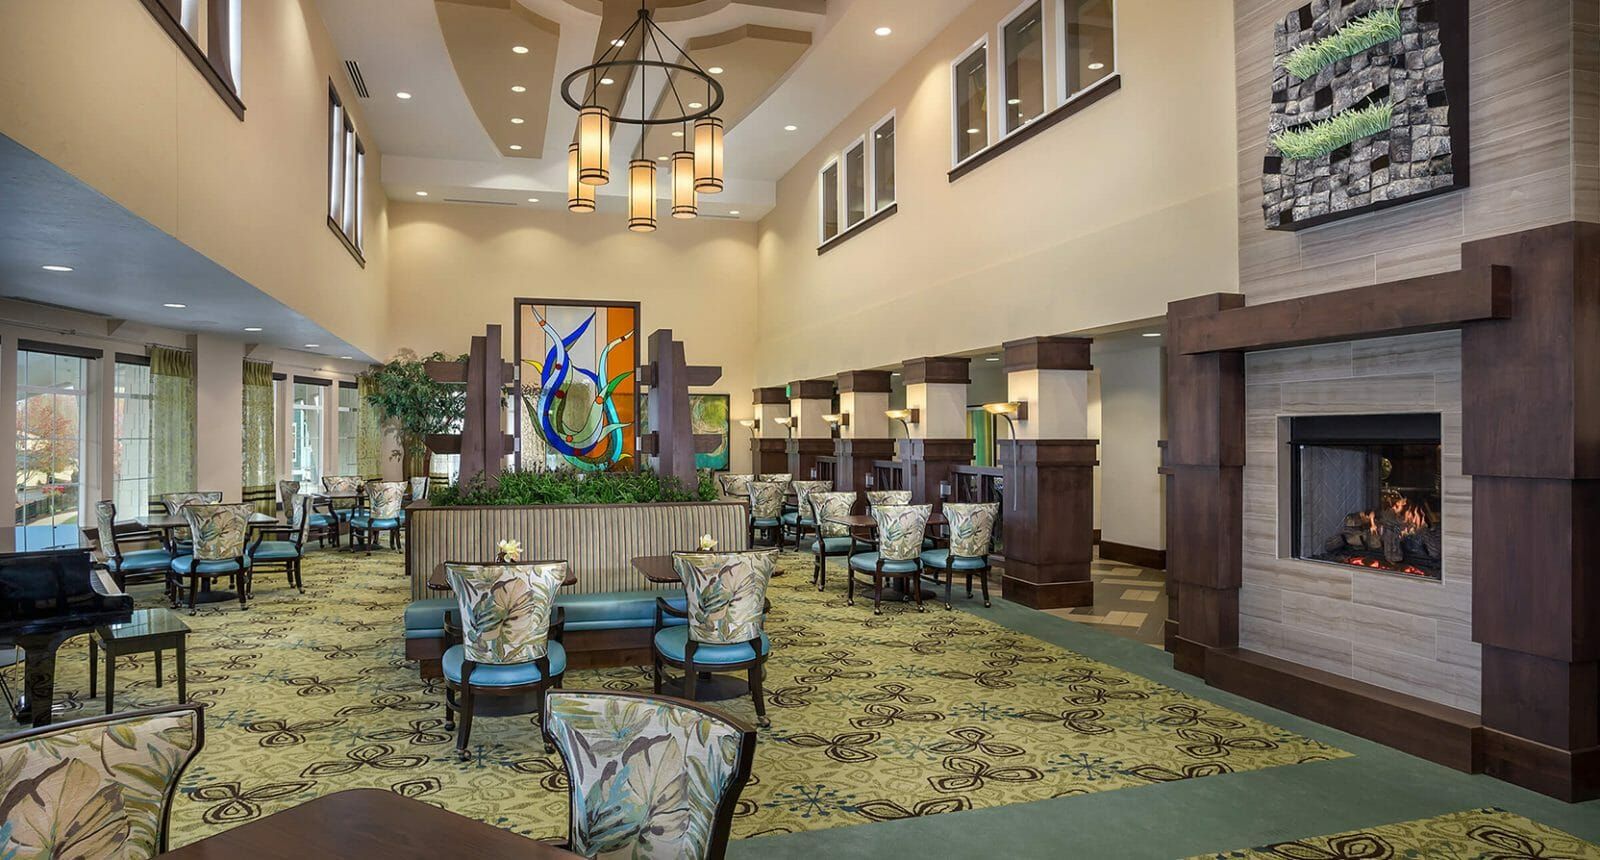 Senior housing community interior with vaulted ceilings and seating for guests and residents